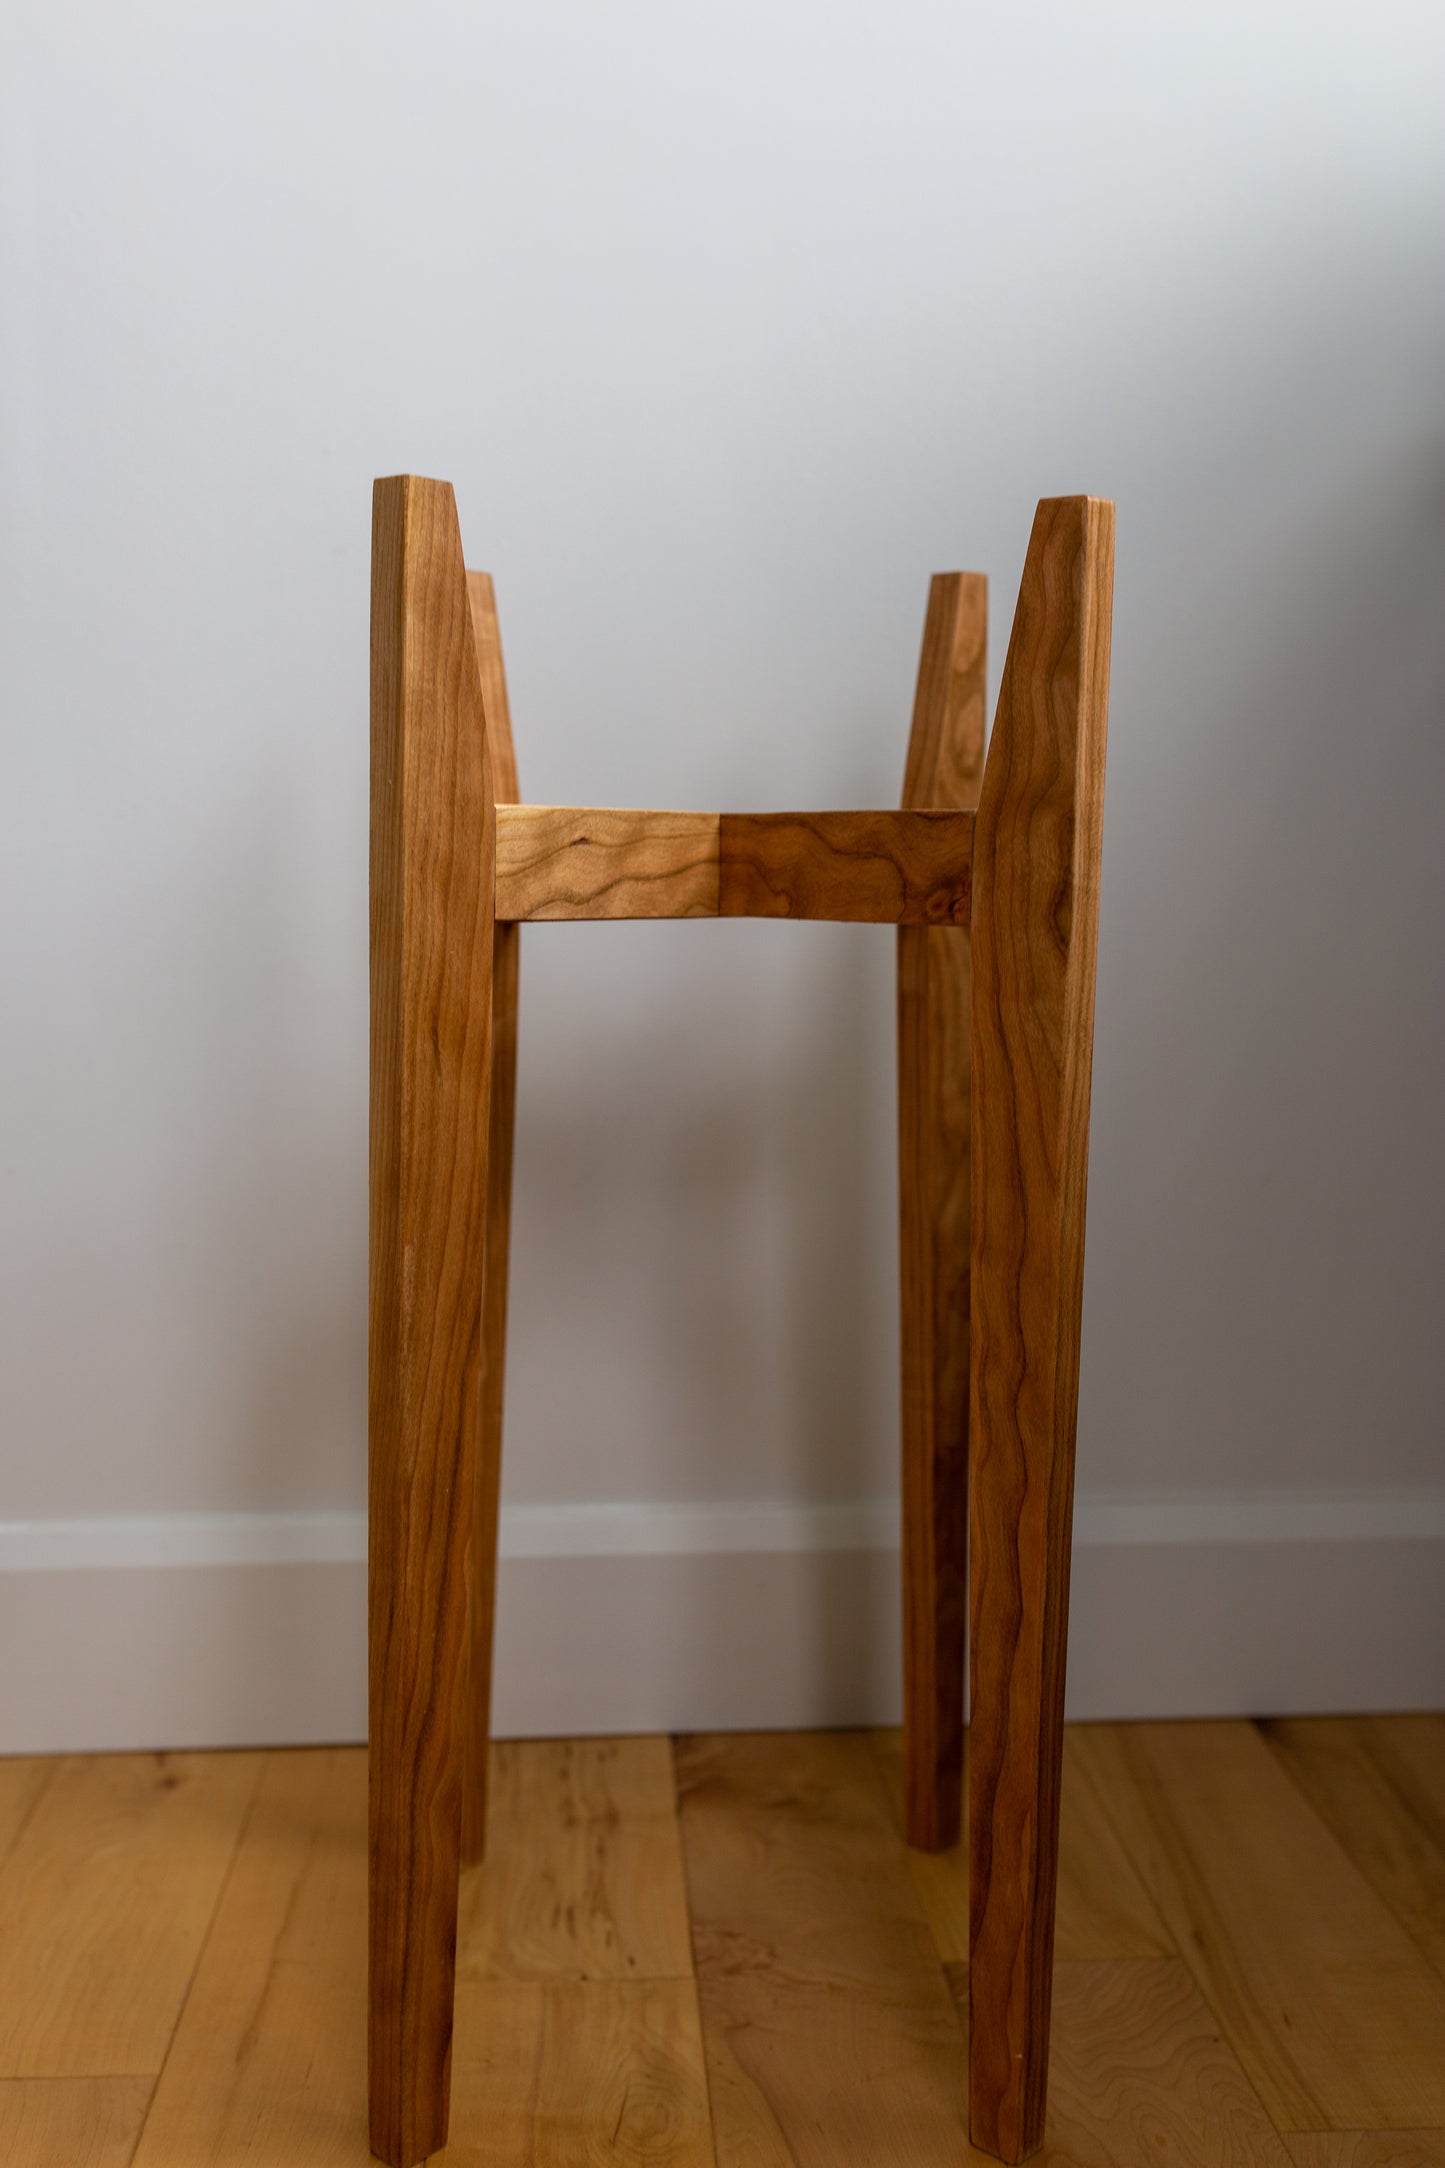 Hand Crafted Plant Stands